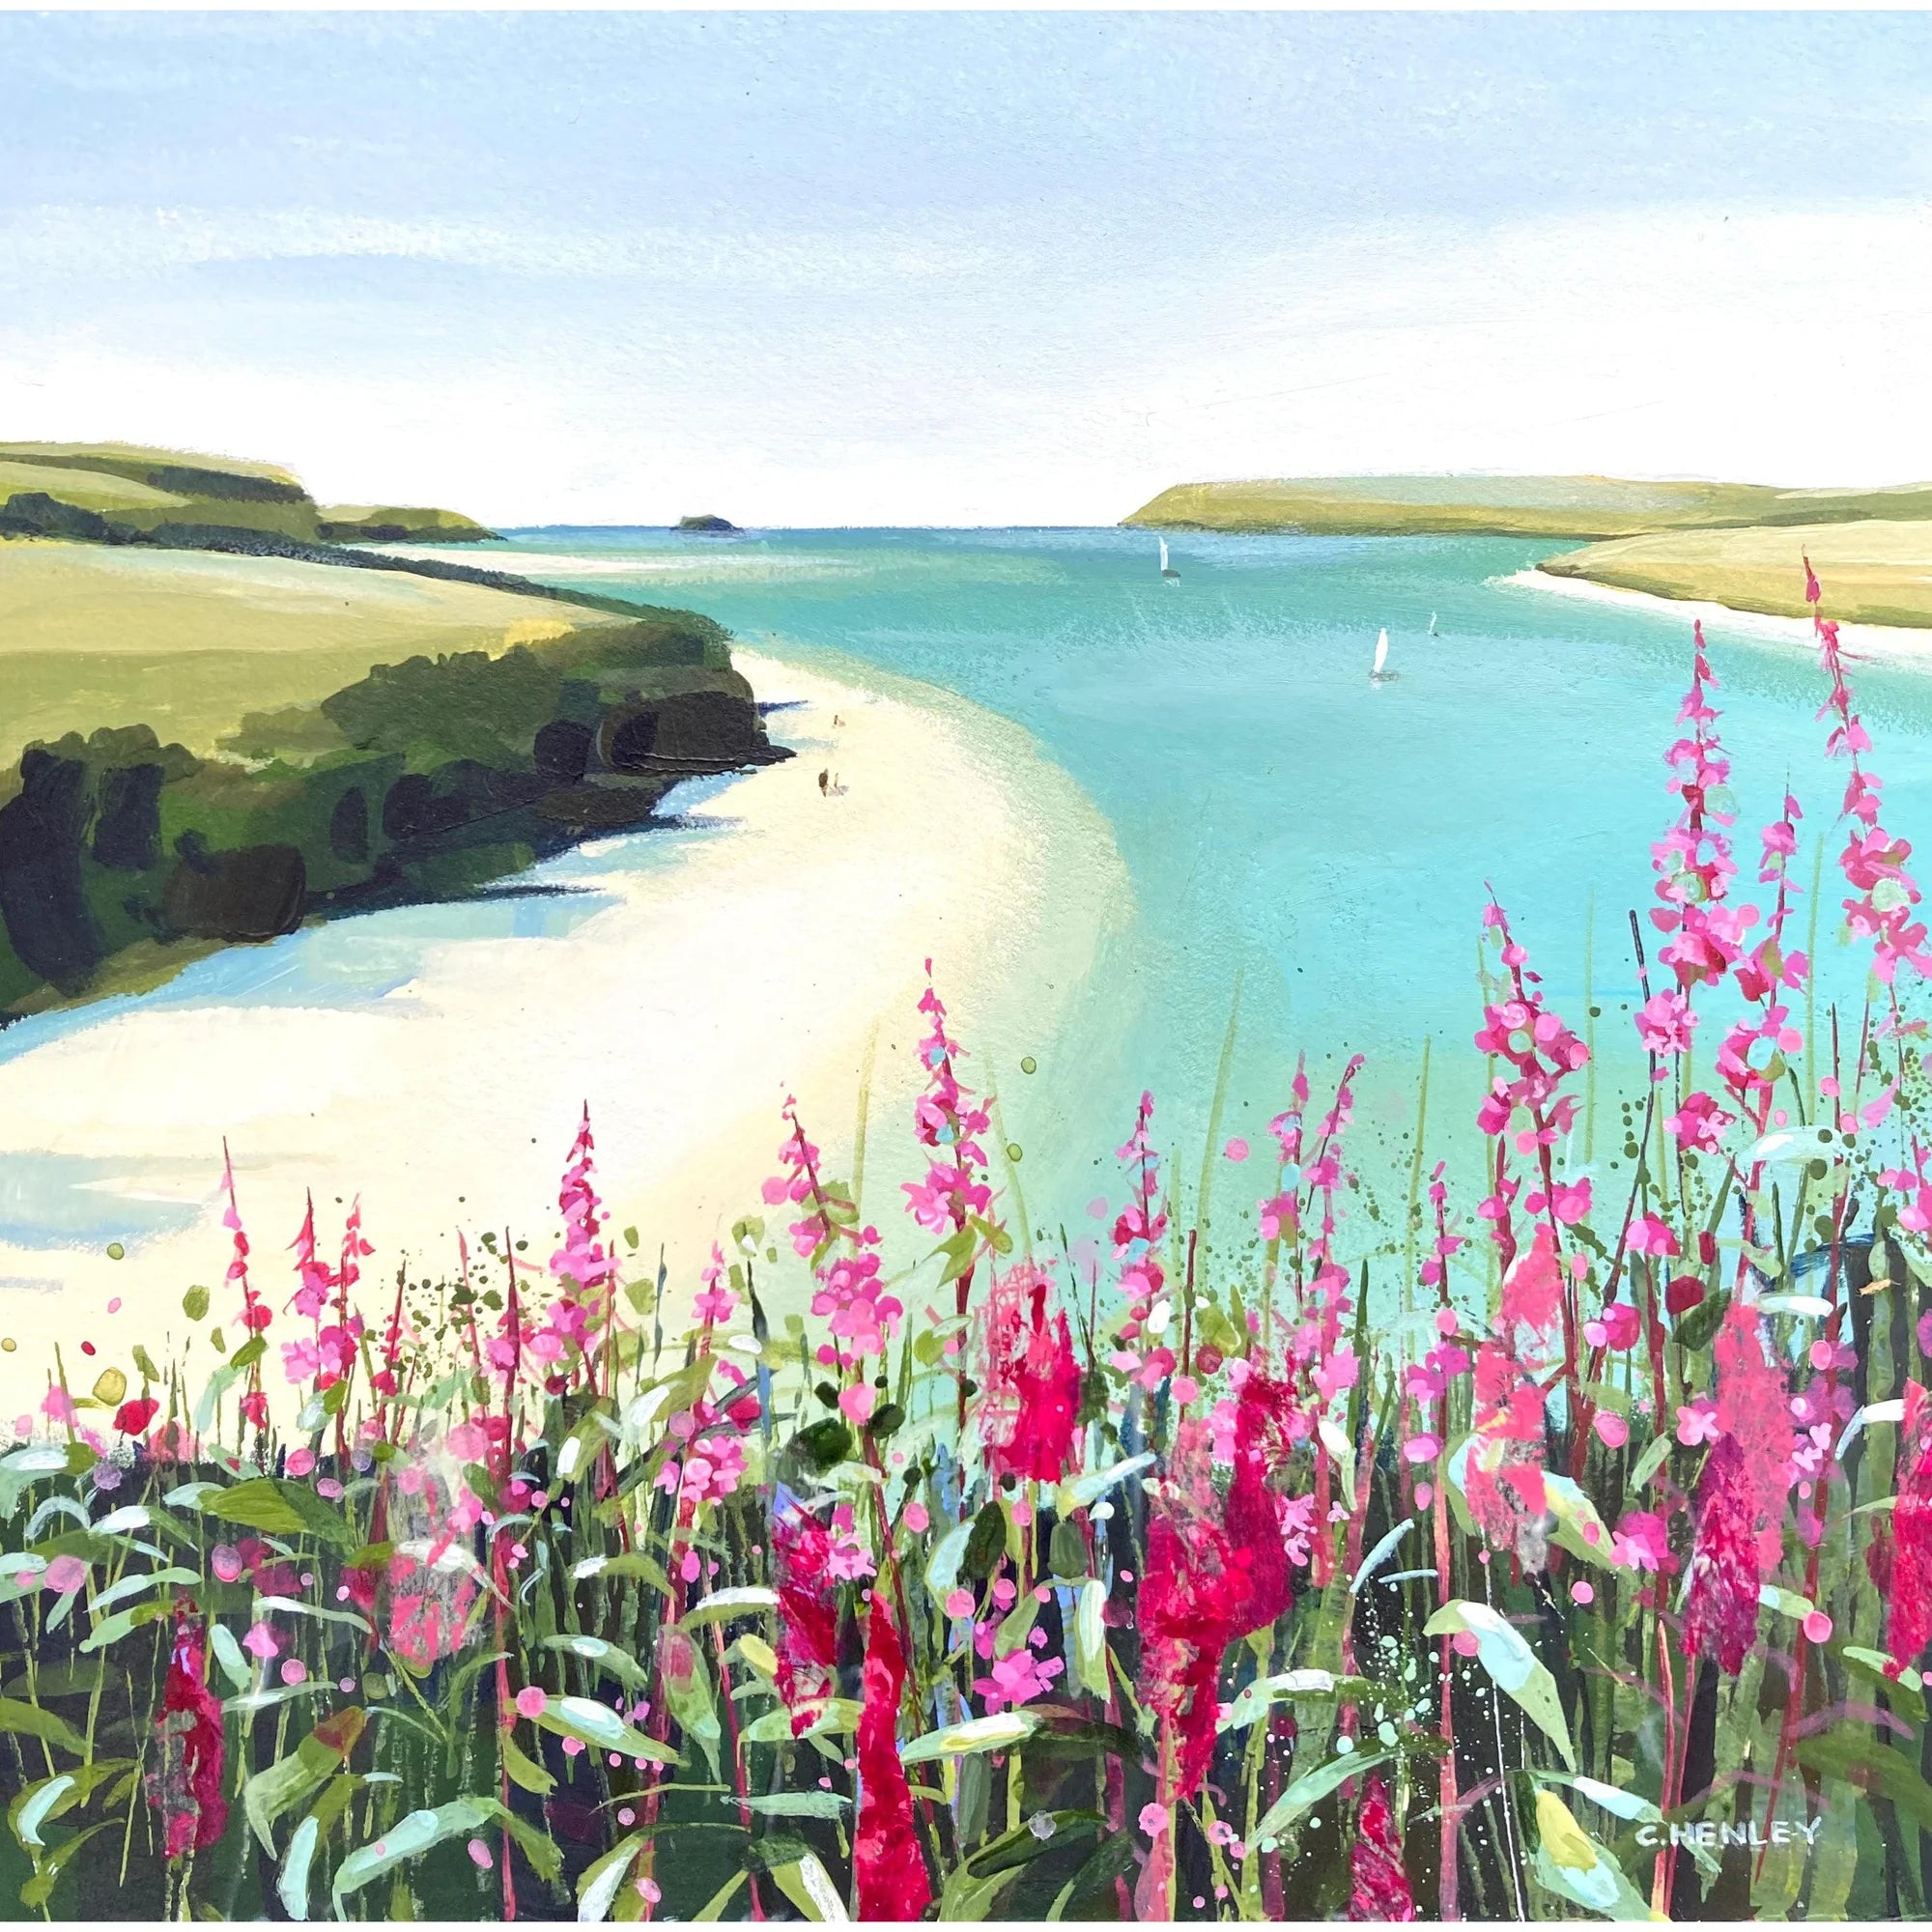 Willowherb by the Camel Estuary by Claire Henley available at Padstow Gallery, Cornwall